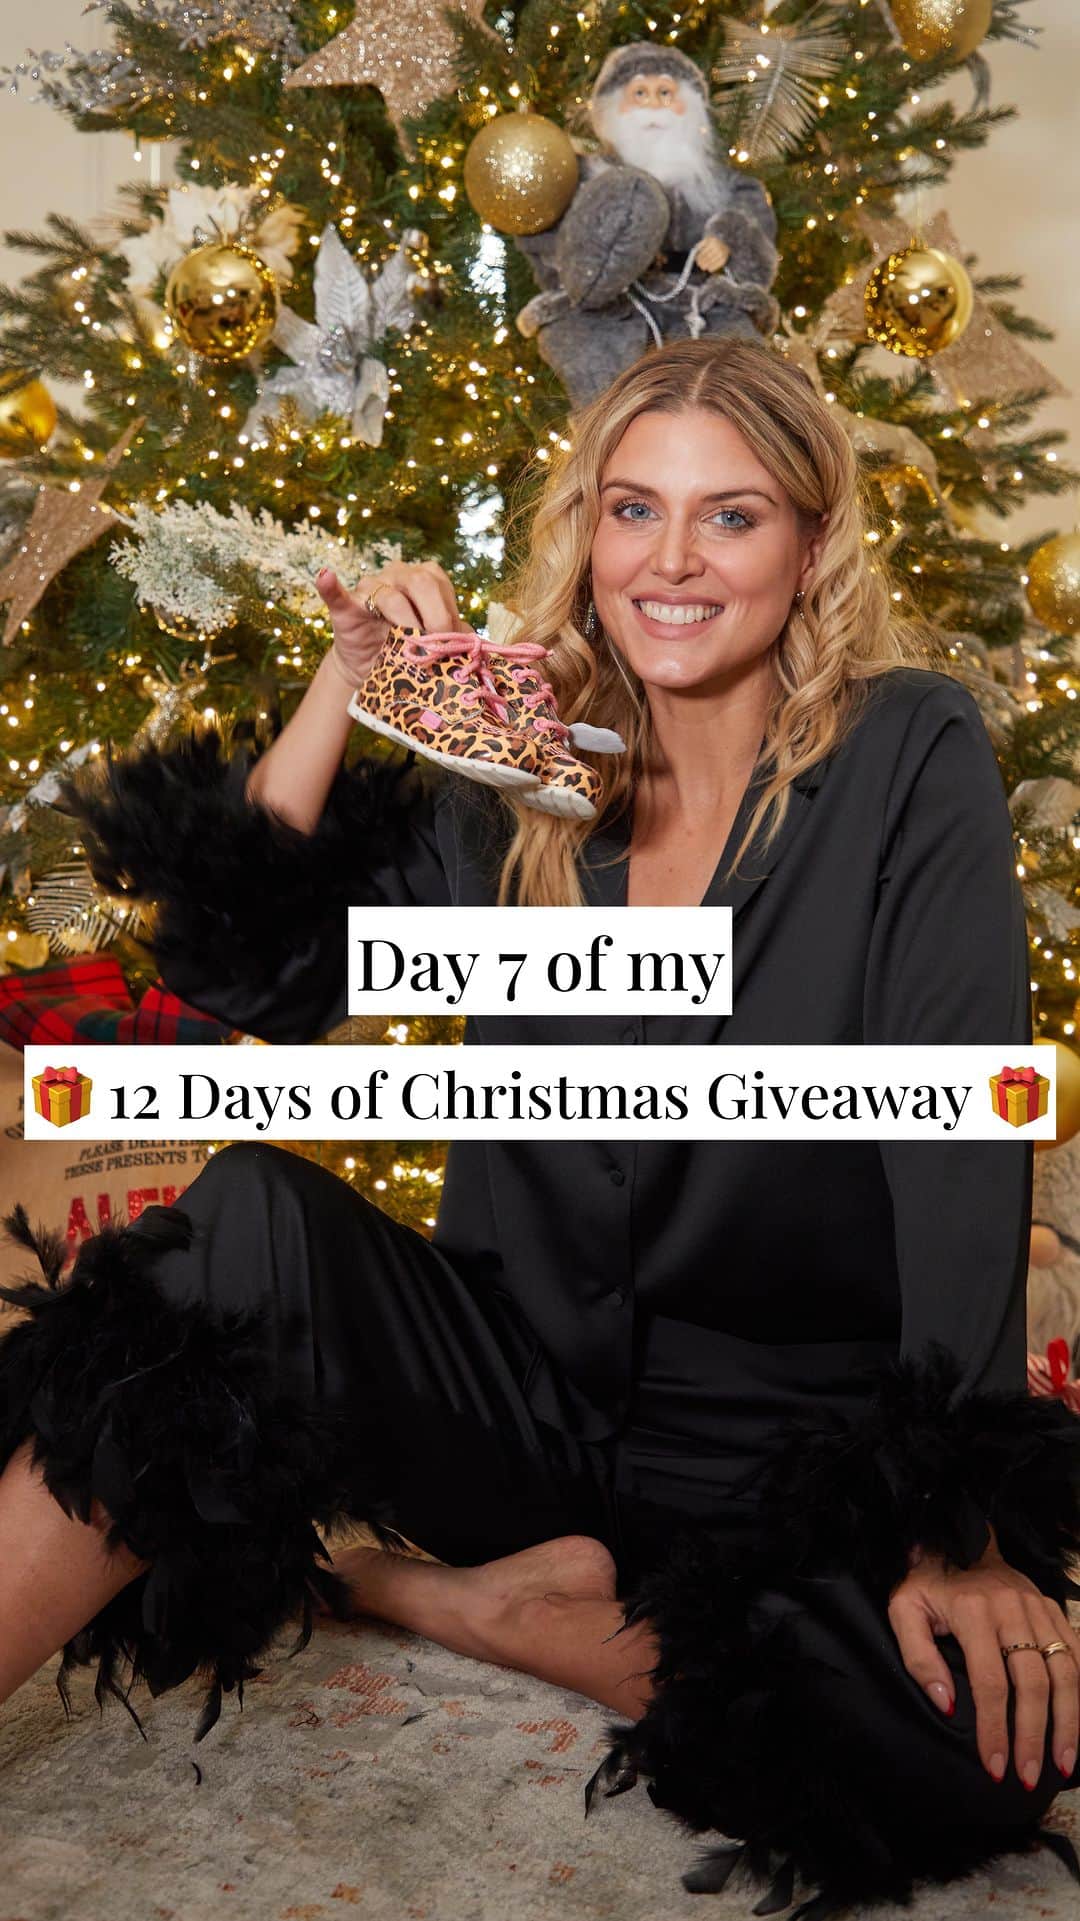 Ashley Jamesのインスタグラム：「**CLOSED** ad ADVENT GIVEAWAY DAY 7: win Christmas Kicks for your littles from @kickerskidsuk 🤶🏼❤️  Sorry but this is giving me ALL the nostalgia because Kickers were THE coolest shoes when I was at school! 😍 We absolutely love them on Alf and you may have seen recently that we got Ada her first little pair too - the pink and leopard print is me down to a T! 🥹 Anyway, I was so happy when the brand said they’d kit out one lucky person’s kids. 🤪✨I just want to say this isn’t a paid partnership, I just genuinely loved their shoes.   So this Christmas whether you have 1 child or 5, I am so excited to giveaway the chance to win a pair of @kickerskidsuk for your child/ren! 👟   So to win: ✨must be following me and @kickerskidsuk ✨ LIKE and COMMENT why you’d love to win and TAG A FRIEND you think would also love to win* ✨You can comment as many times as you like - the winner will be selected by random generator, so the more you comment the more chance of winning! ✨I will announce the winner in 48 hours, announcing on stories and messaging privately asking for your address - and I will do so on this account only. I won’t be asking for bank details so please don’t reply to any fake account if anyone reaches out other than my page.  ✨ Must be UK based  ✨ The prize will be Kickers Kids shoes for the winners children - available in baby, infant and junior sizes, the style of the shoes on offer will be subject to availability.  ✨ Those who dedicate their time being horrible about me and others on gossip websites need not apply. 🤪  The winner will be picked at midday on the 9th December.   So merry Christmas, thank you, and good luck! ❤️✨」